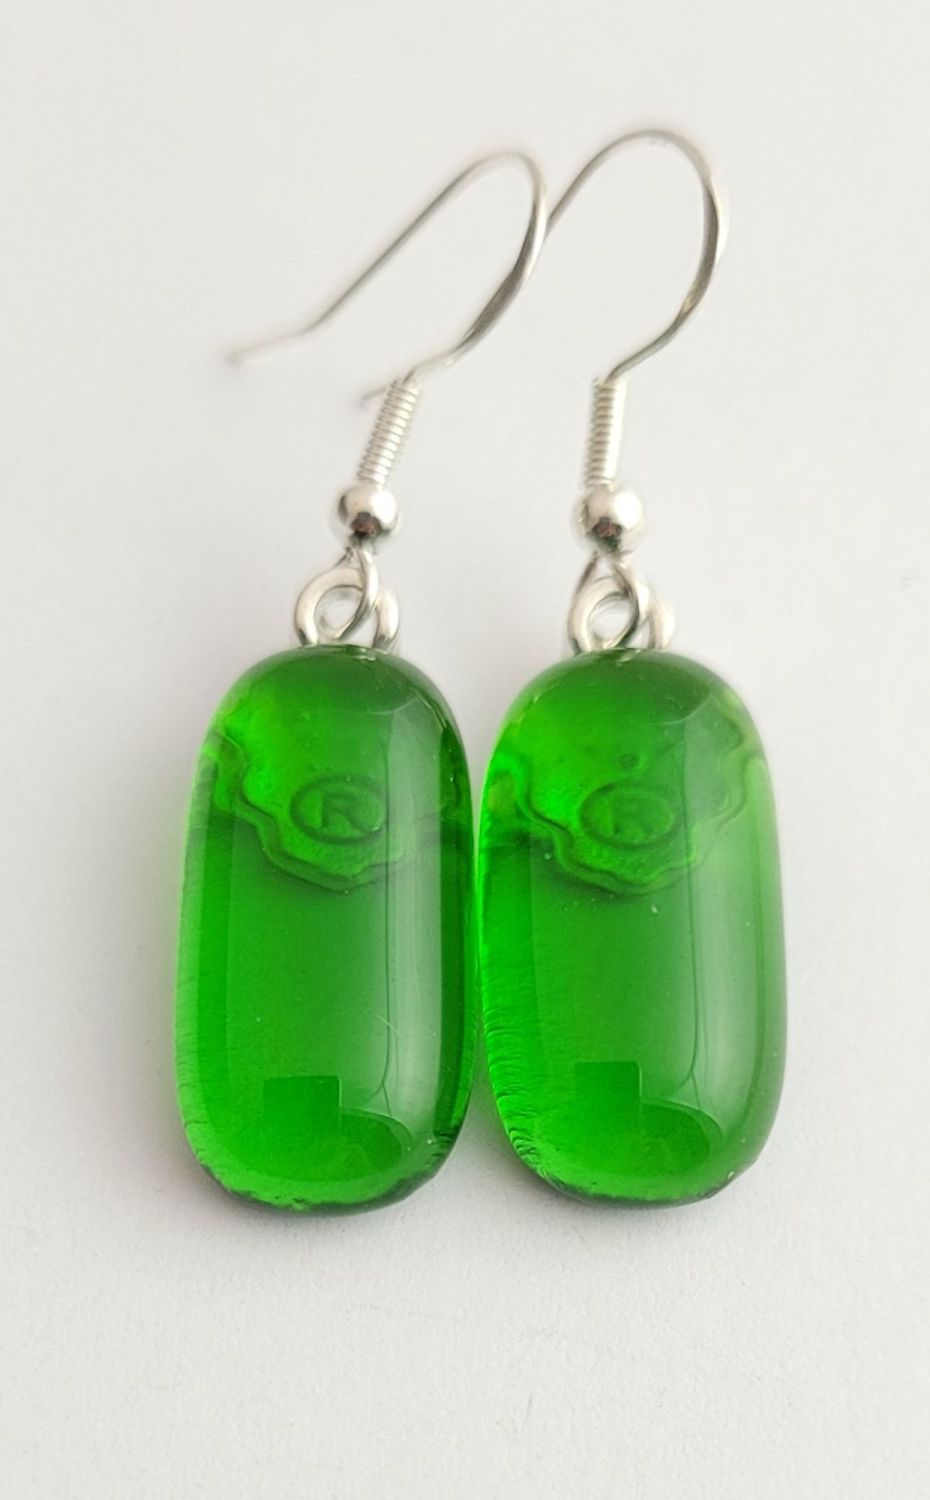 Recycled Tanqueray gin bottle earrings